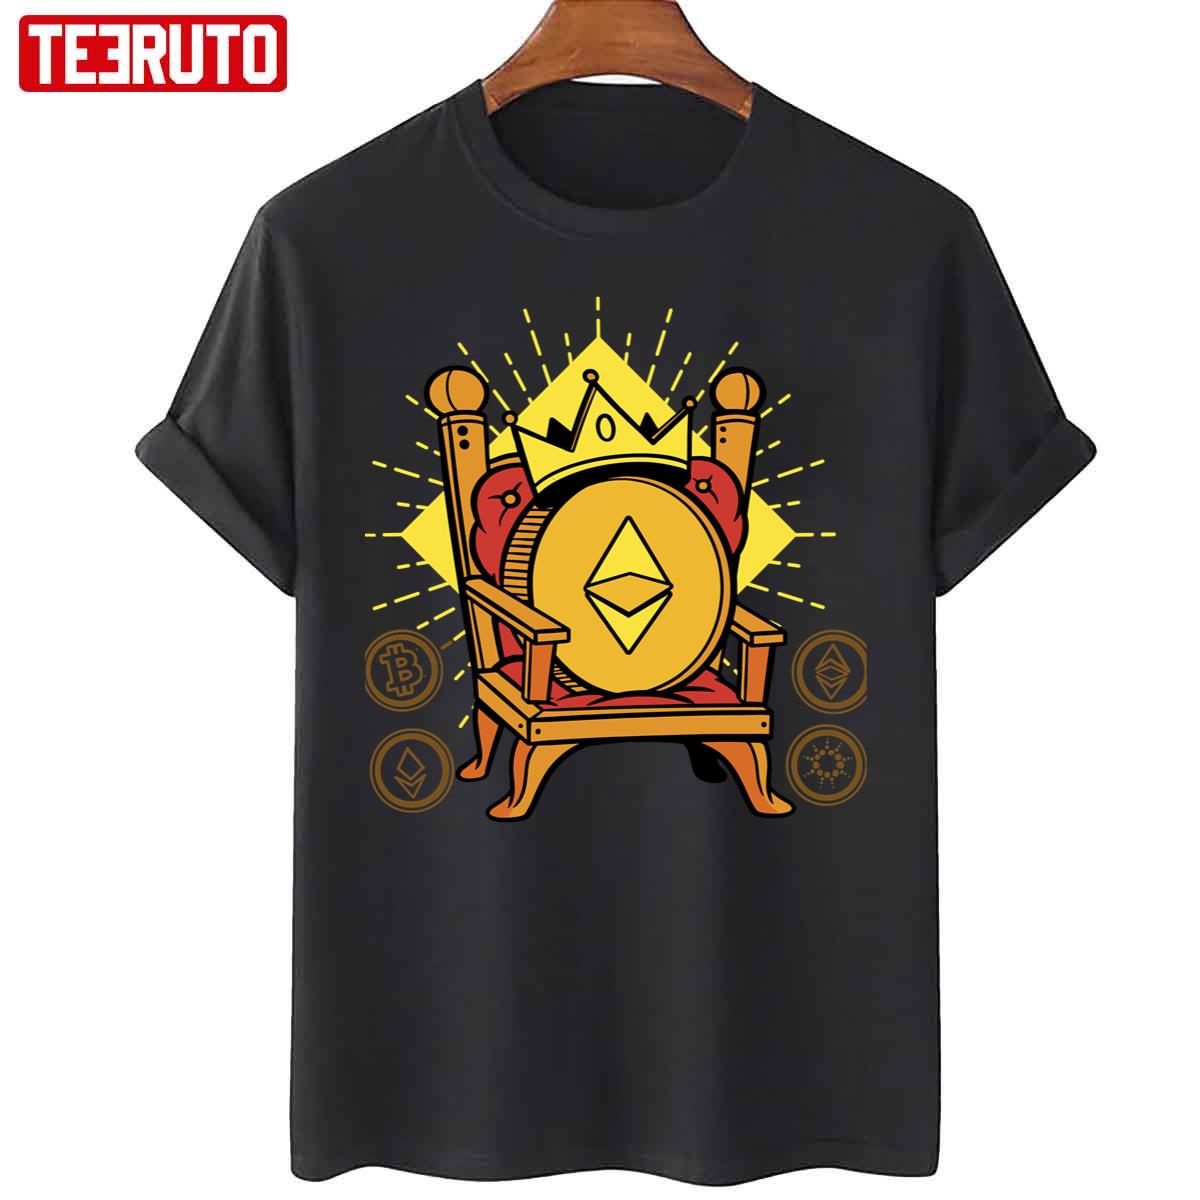 Ethereum Is King Crypto Crow Unisex T-Shirt